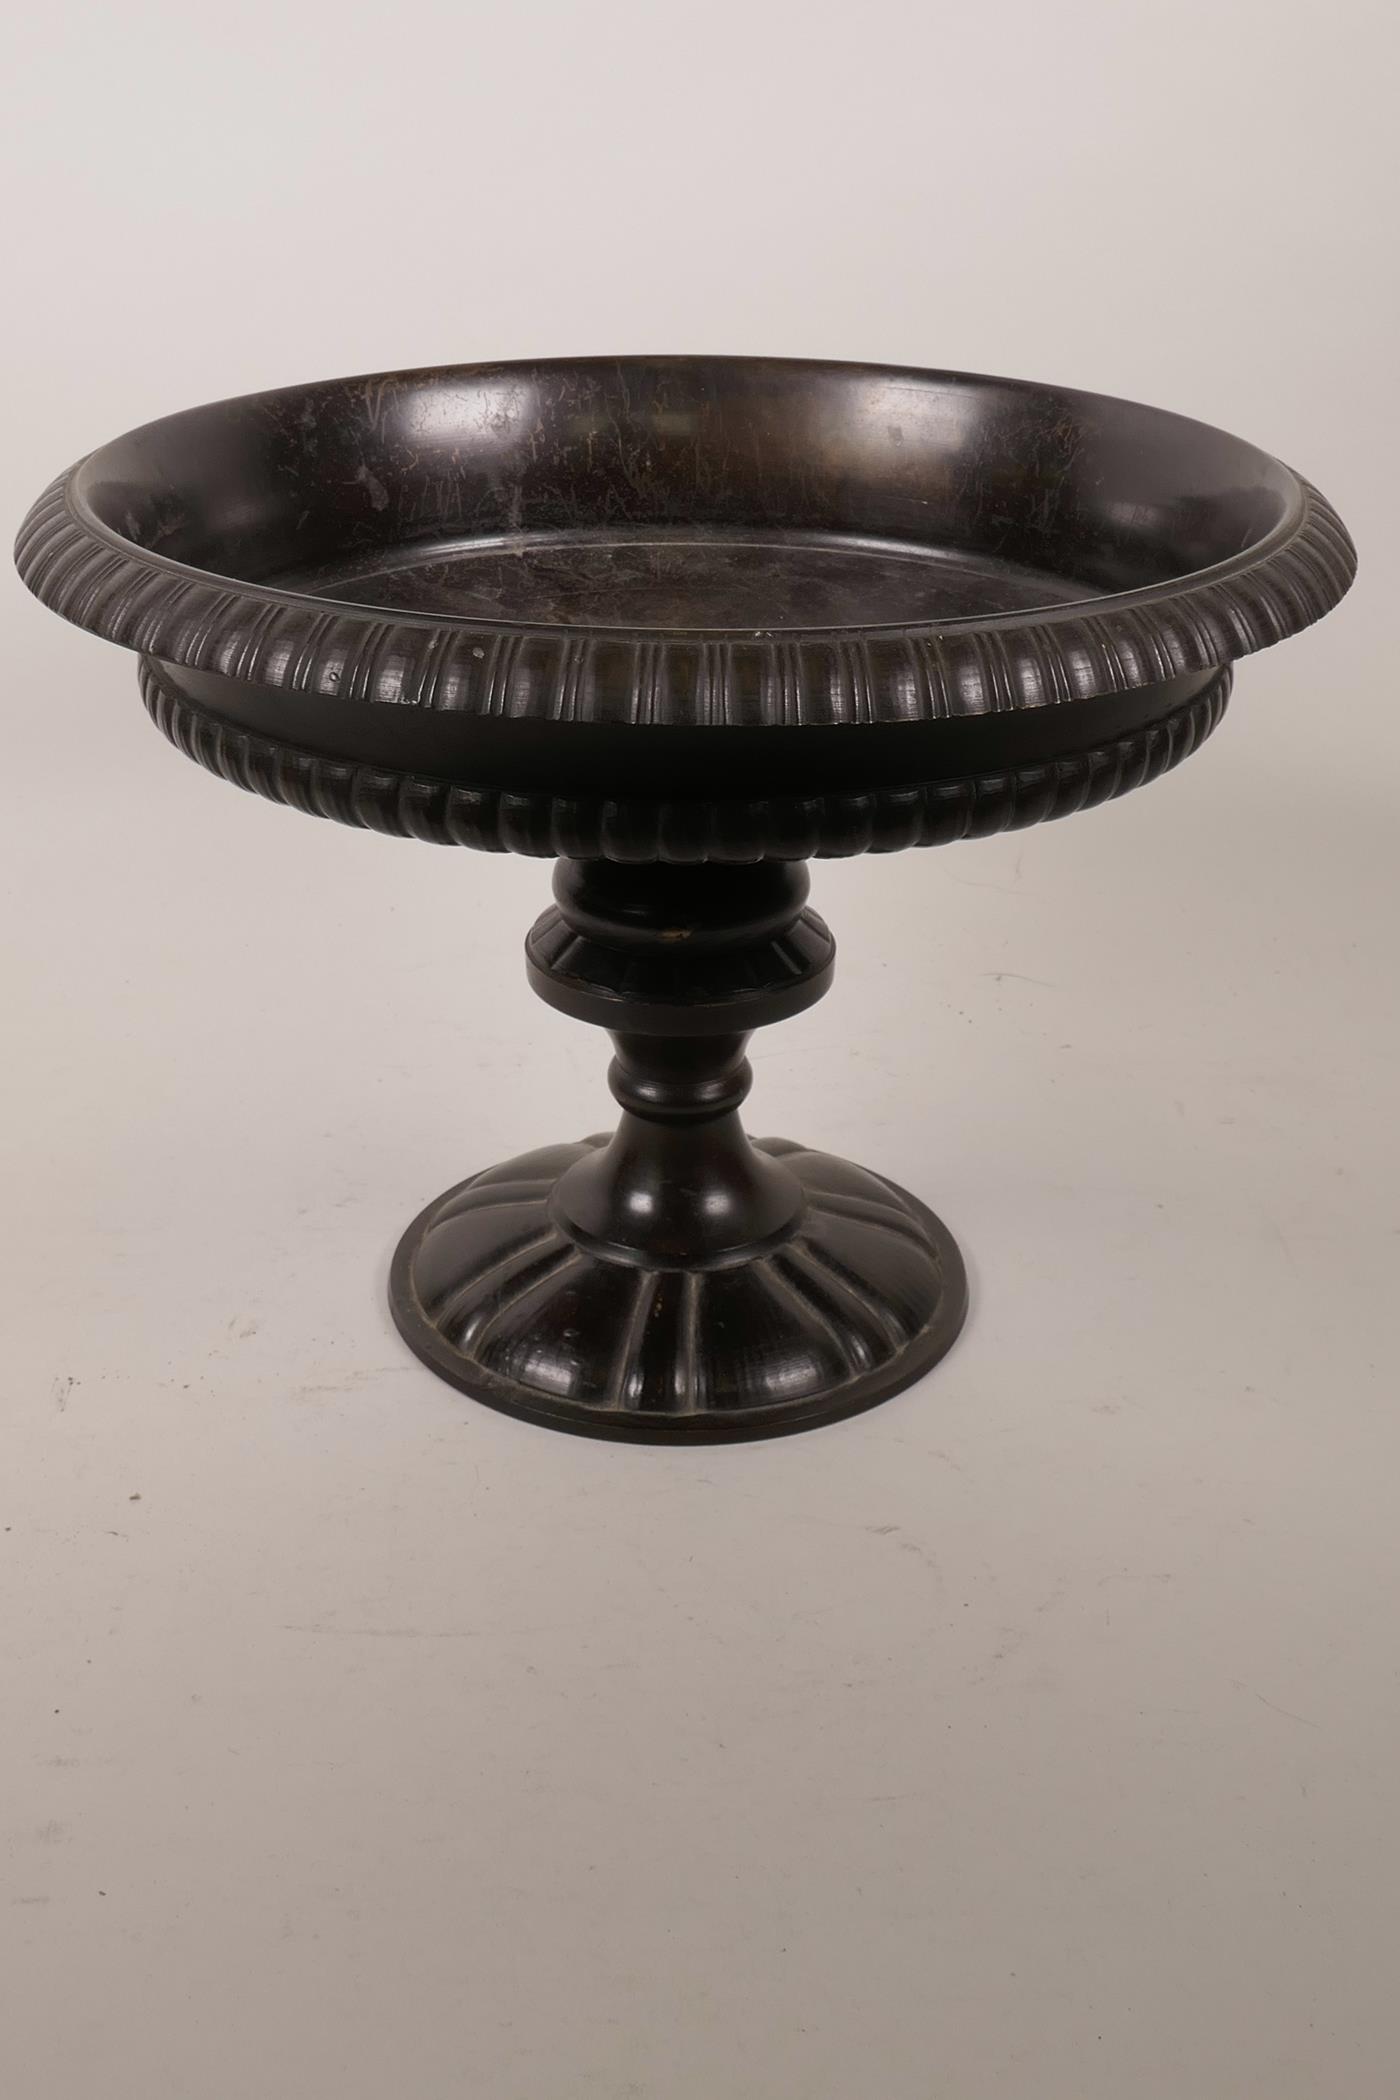 A bronze bowl of classical form, raised on a turned column, 11" diameter x 8" high